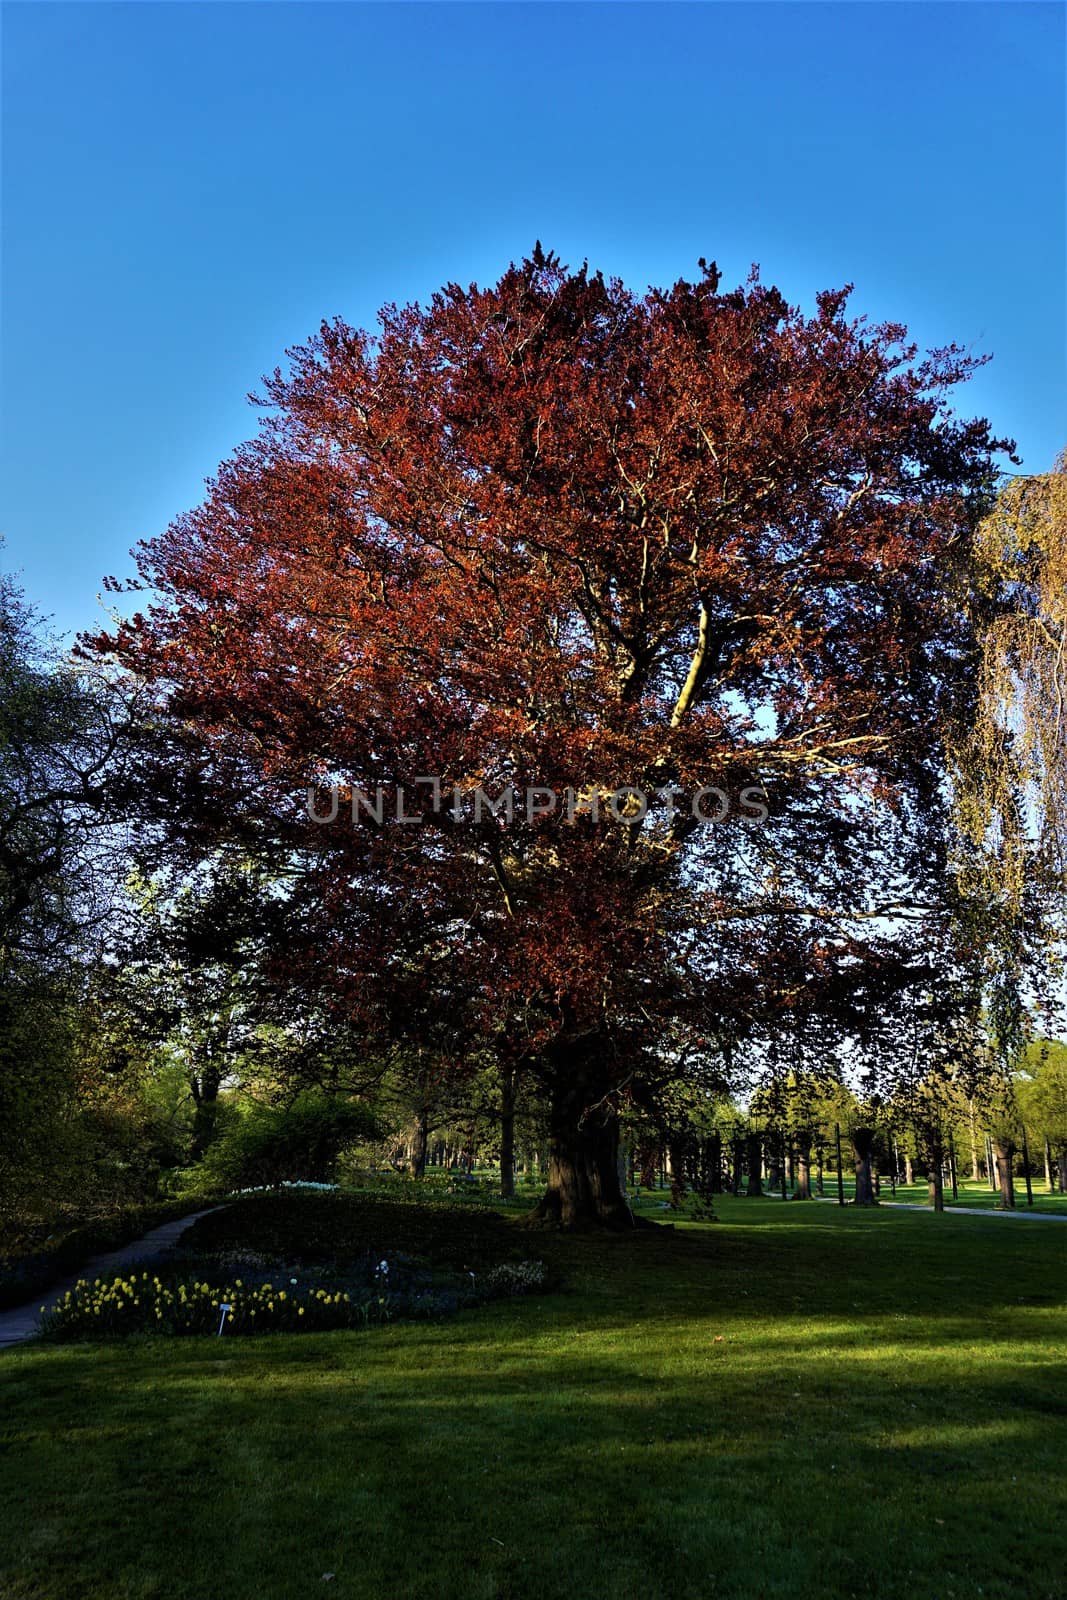 Fagus sylvatica f. purpurea tree spotted in a park by pisces2386